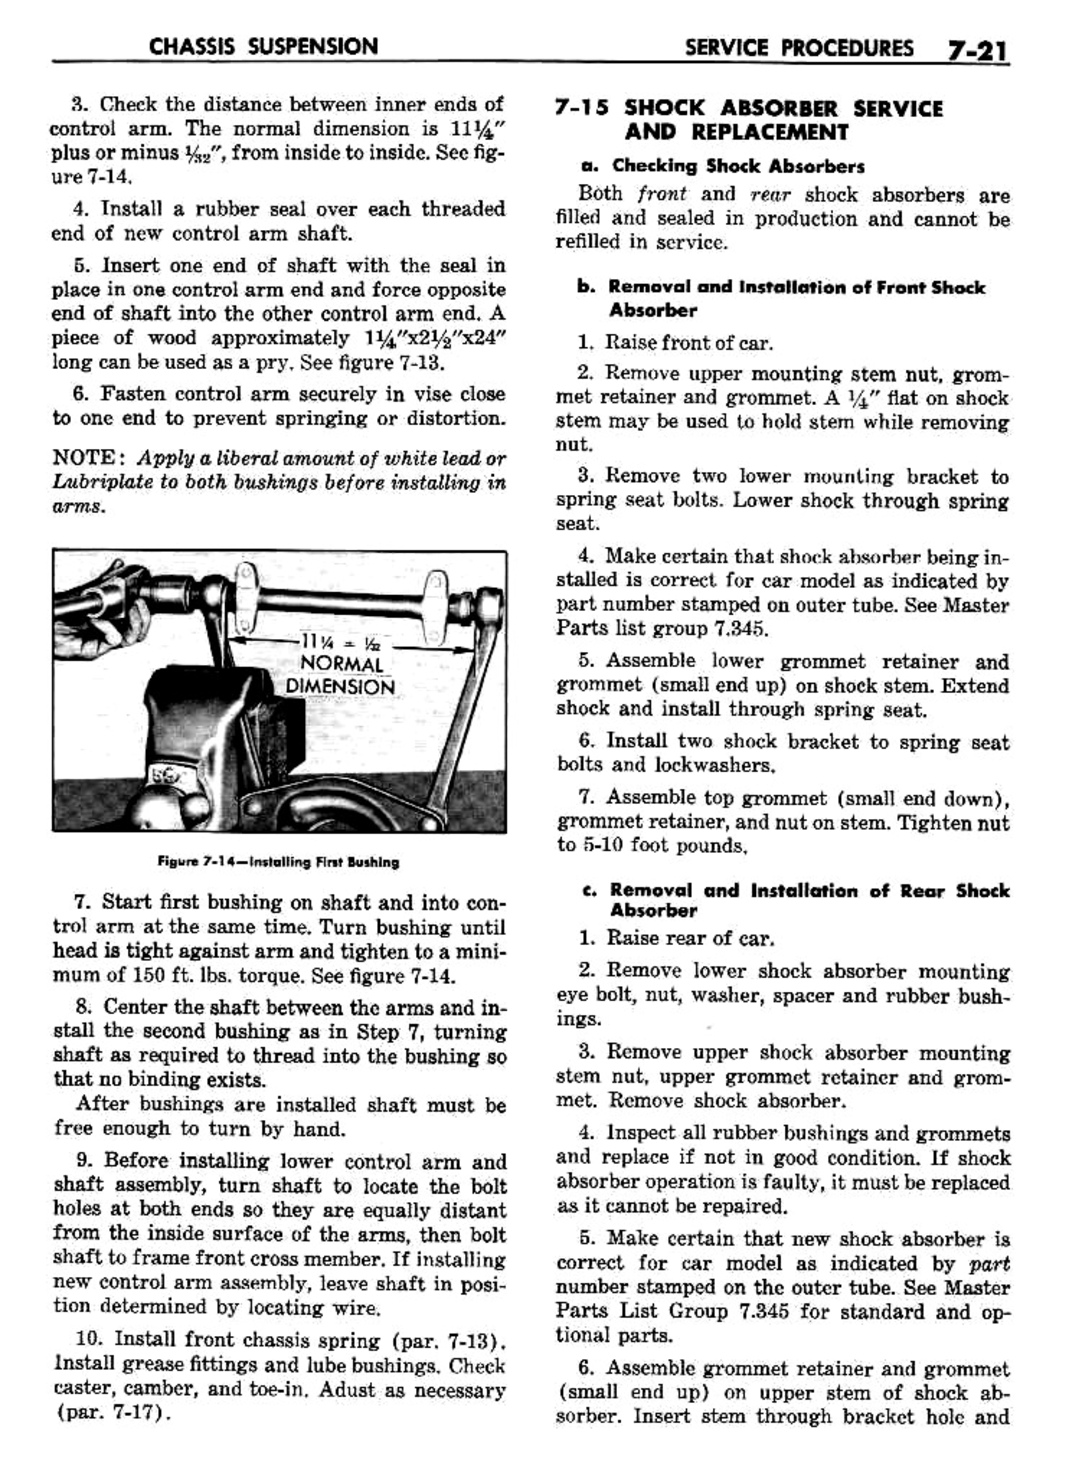 n_08 1960 Buick Shop Manual - Chassis Suspension-021-021.jpg